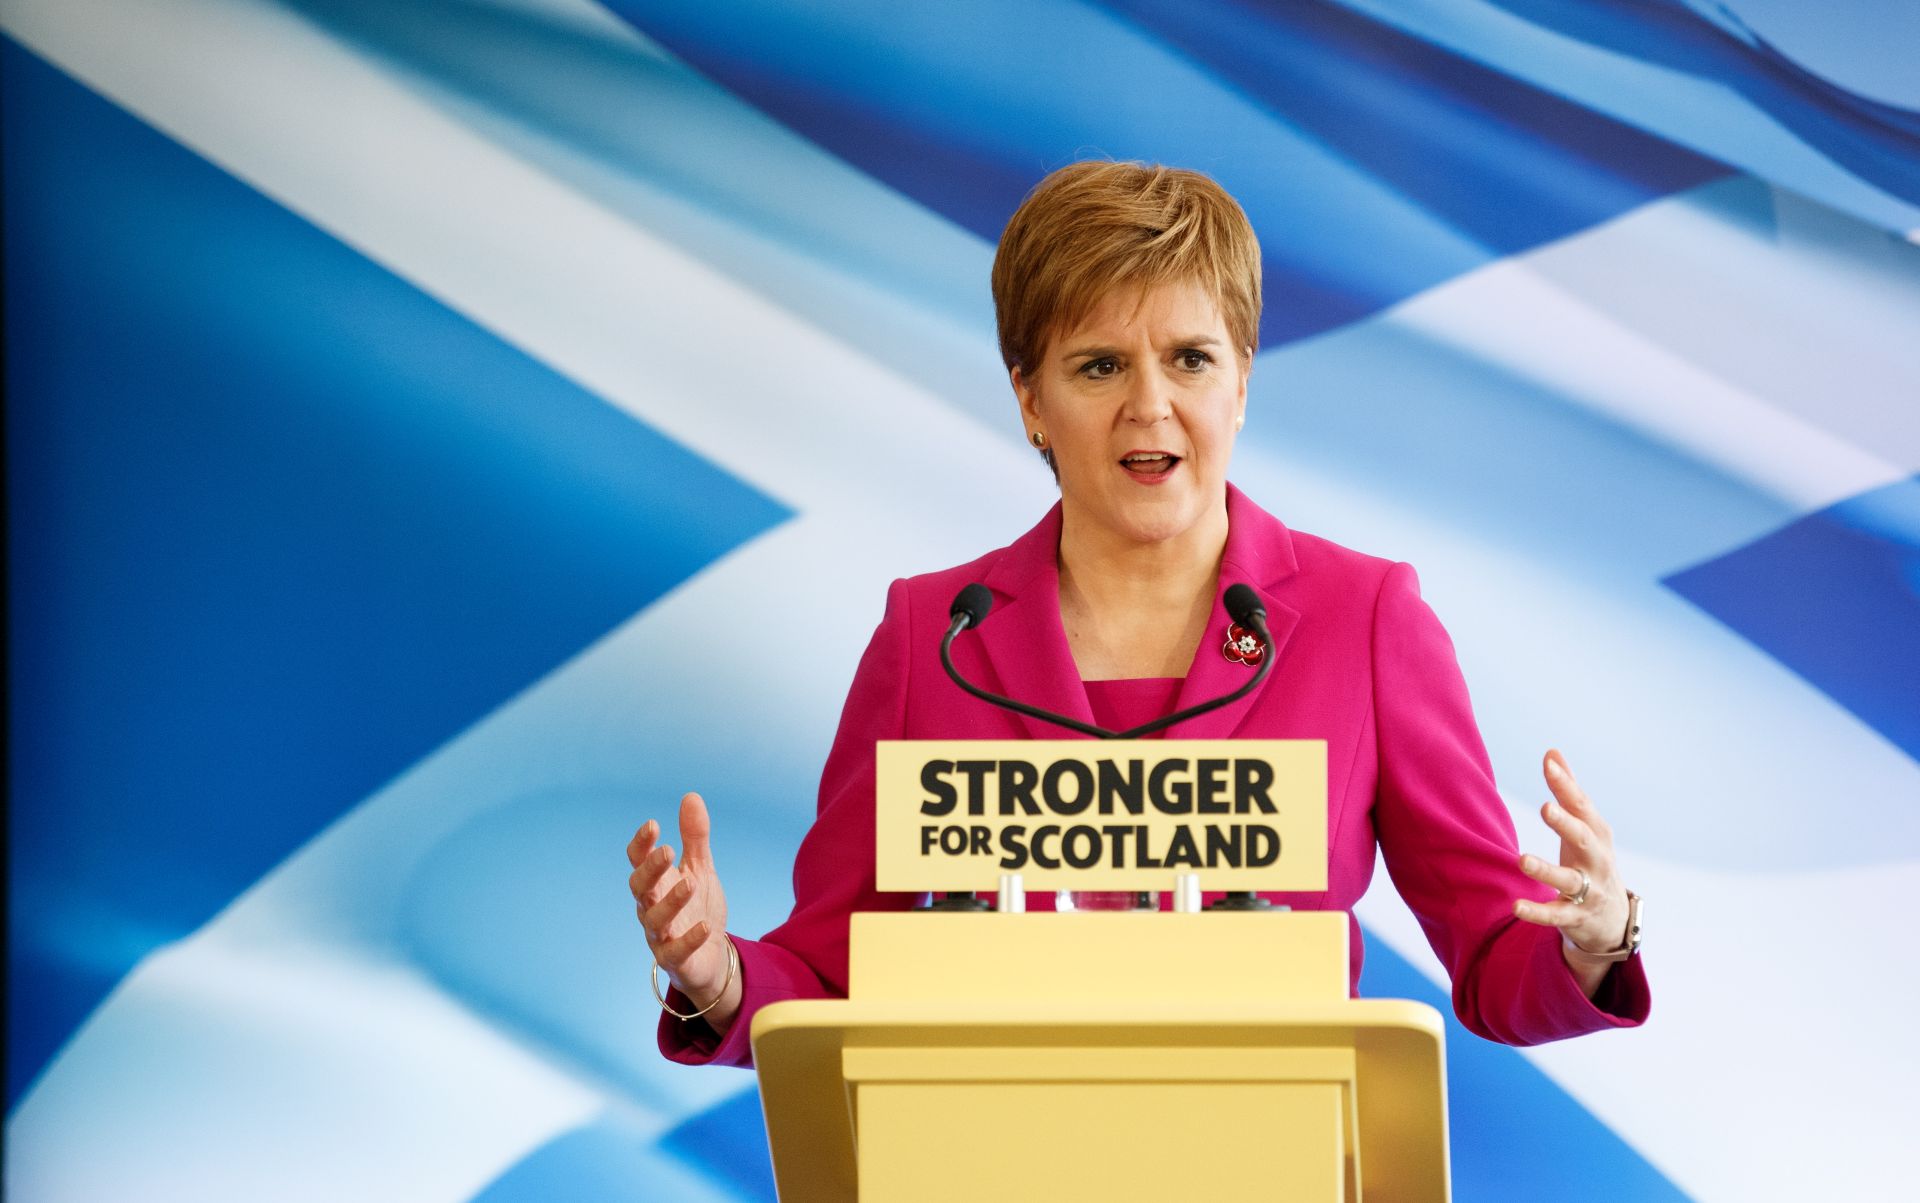 epa07981218 Scottish First Minister and SNP leader Nicola Sturgeon launches SNP election campaign with Westminster candidates in Edinburgh, Scotland, Britain, 08 November 2019. British Prime Minister Boris Johnson has called a general election for 12 December 2019.  EPA/ROBERT PERRY